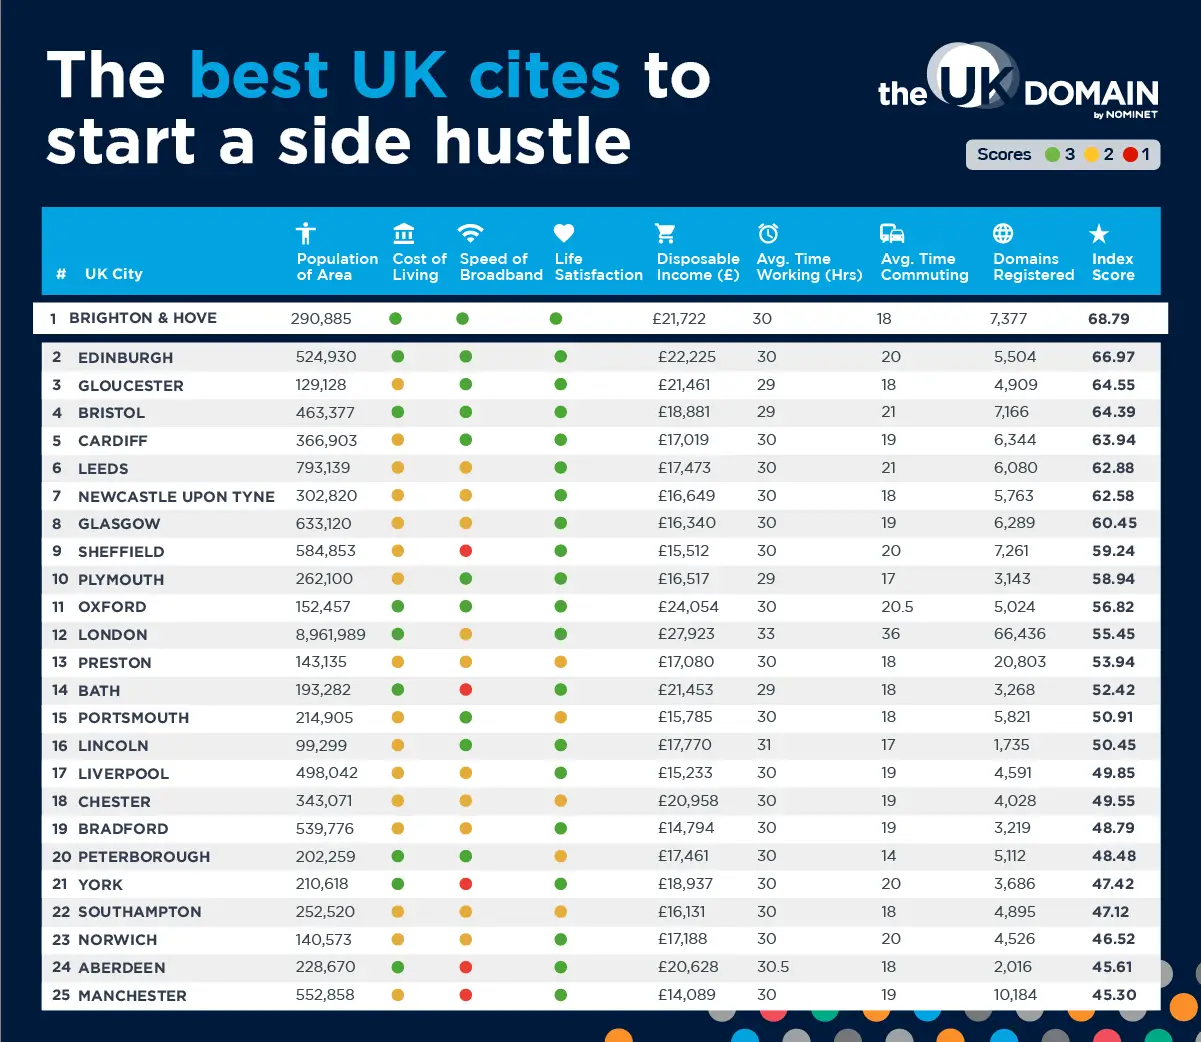 uk-domain-side-hustles-best-cities-to-start-index-1.png